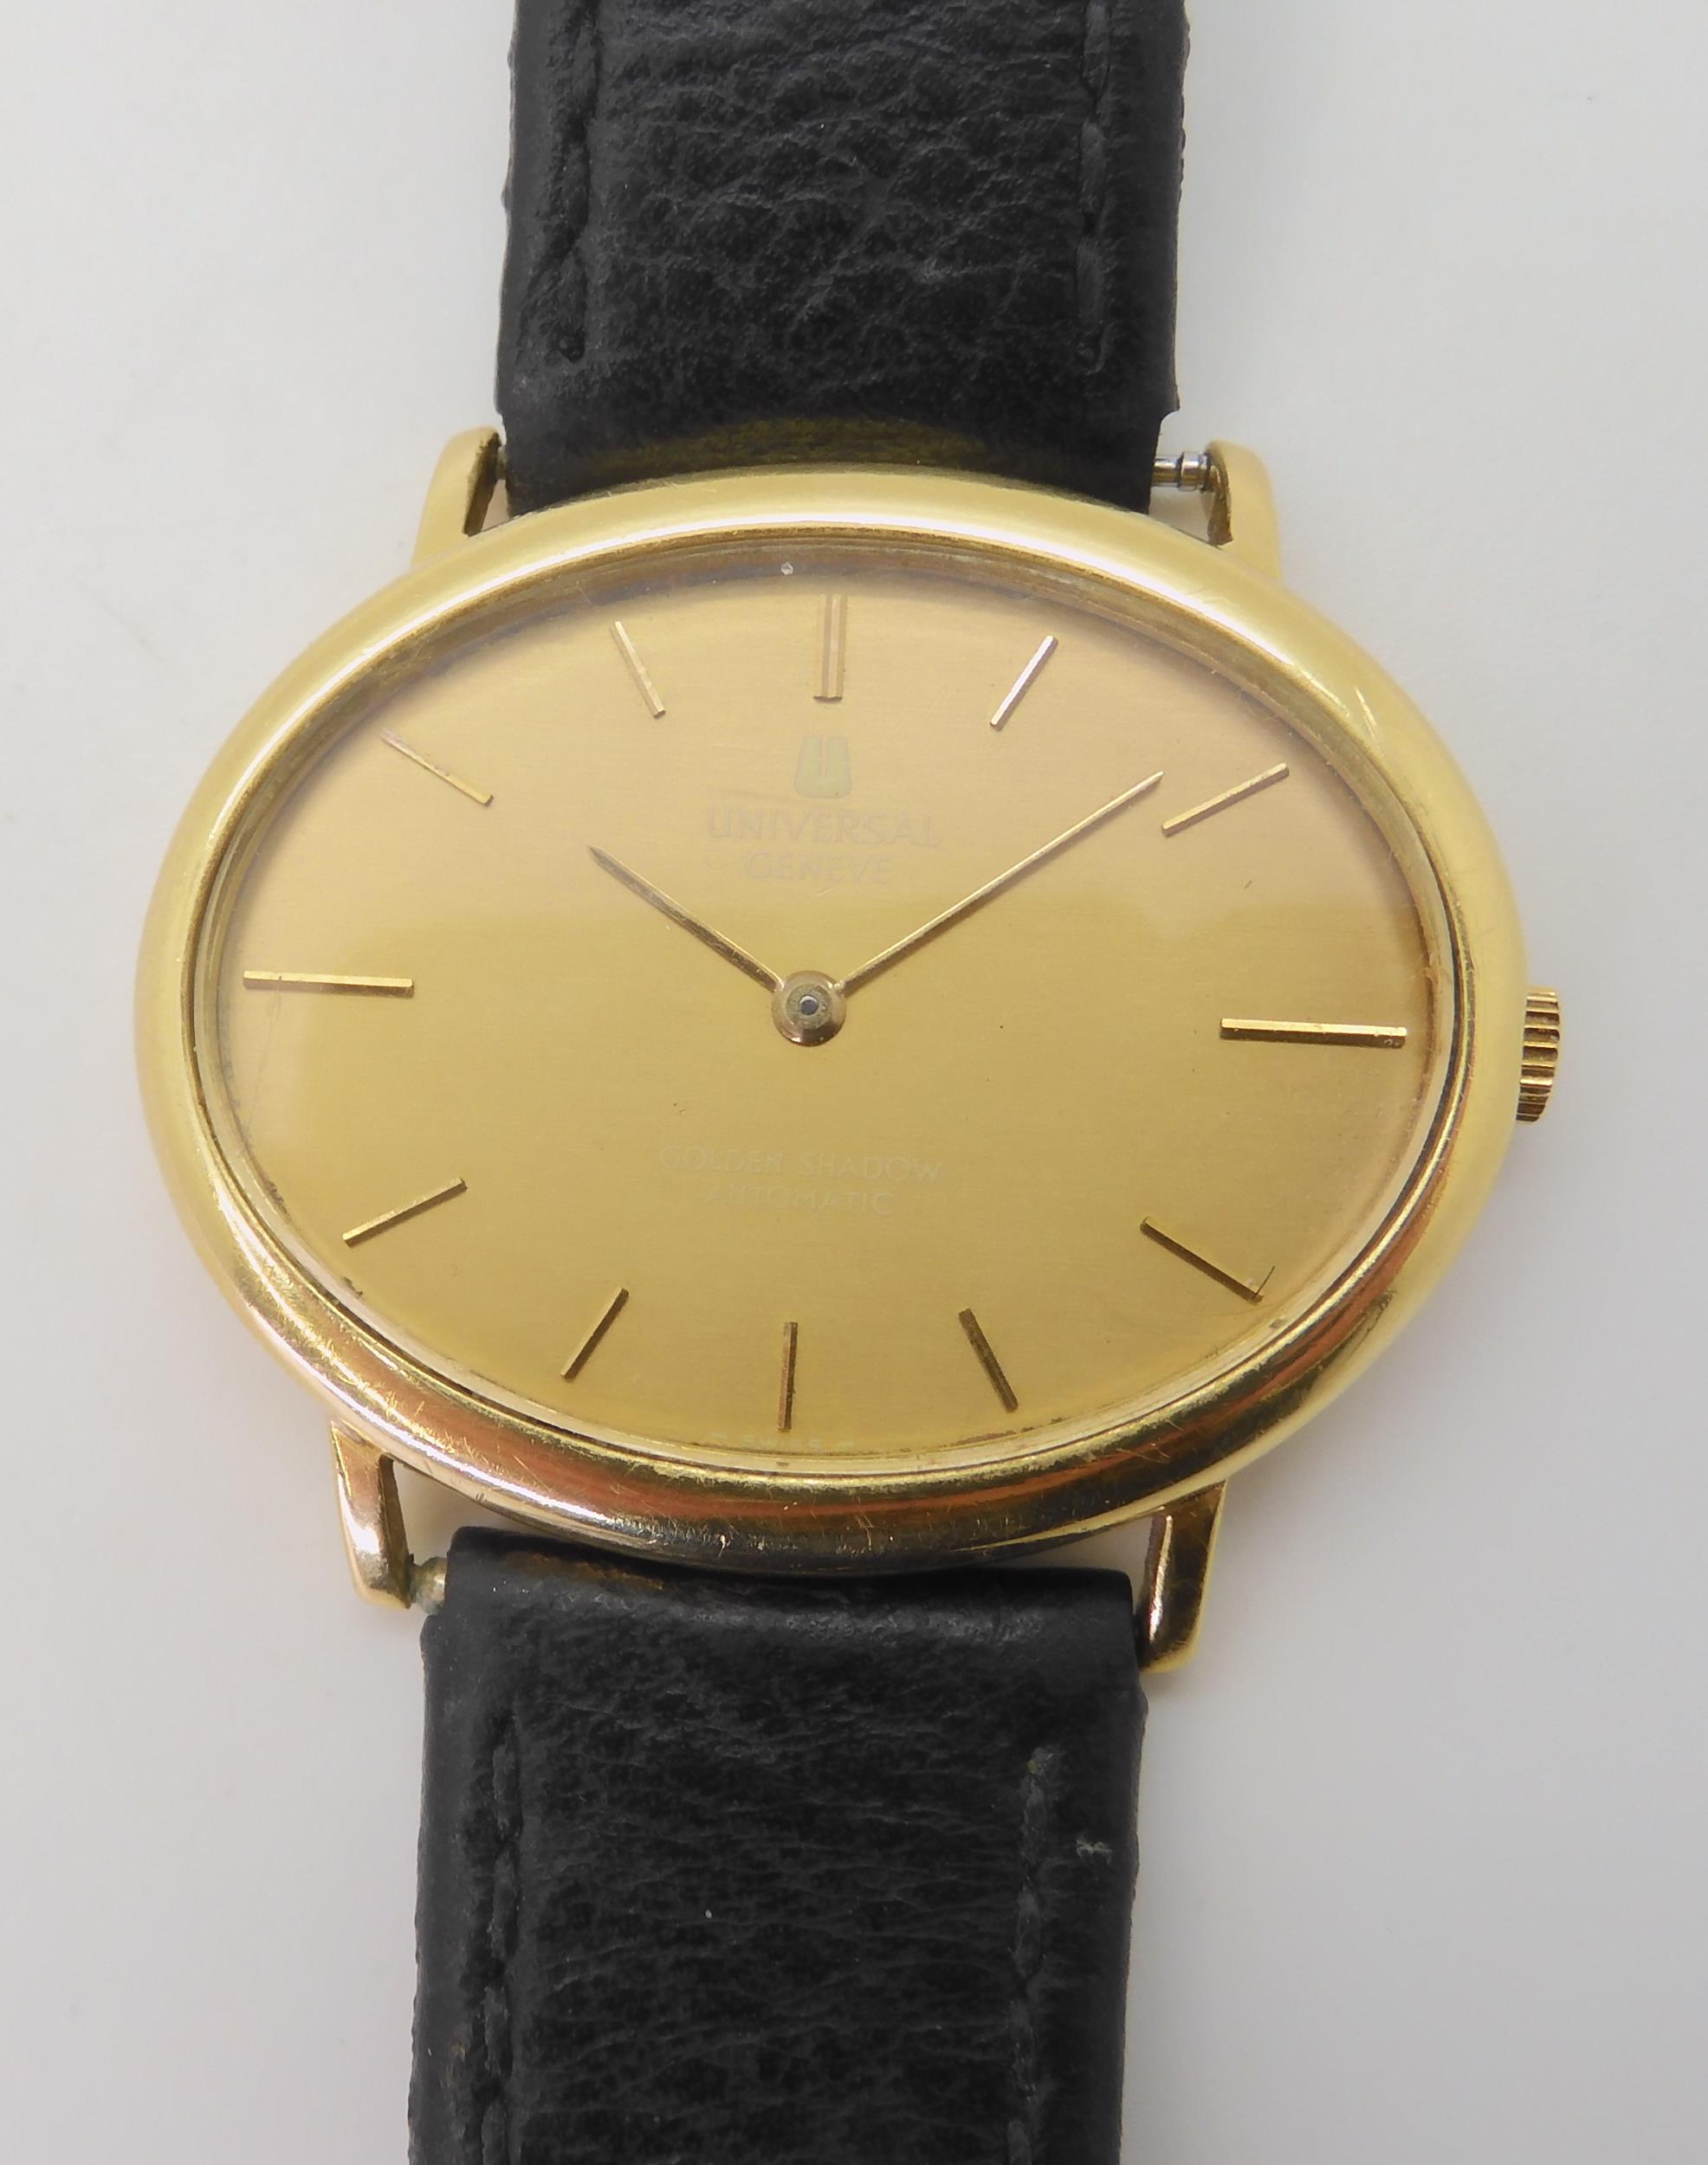 A UNIVERSAL GENEVE GOLDEN SHADOW  with an automatic movement, the case in 18ct gold with Swiss - Image 3 of 6